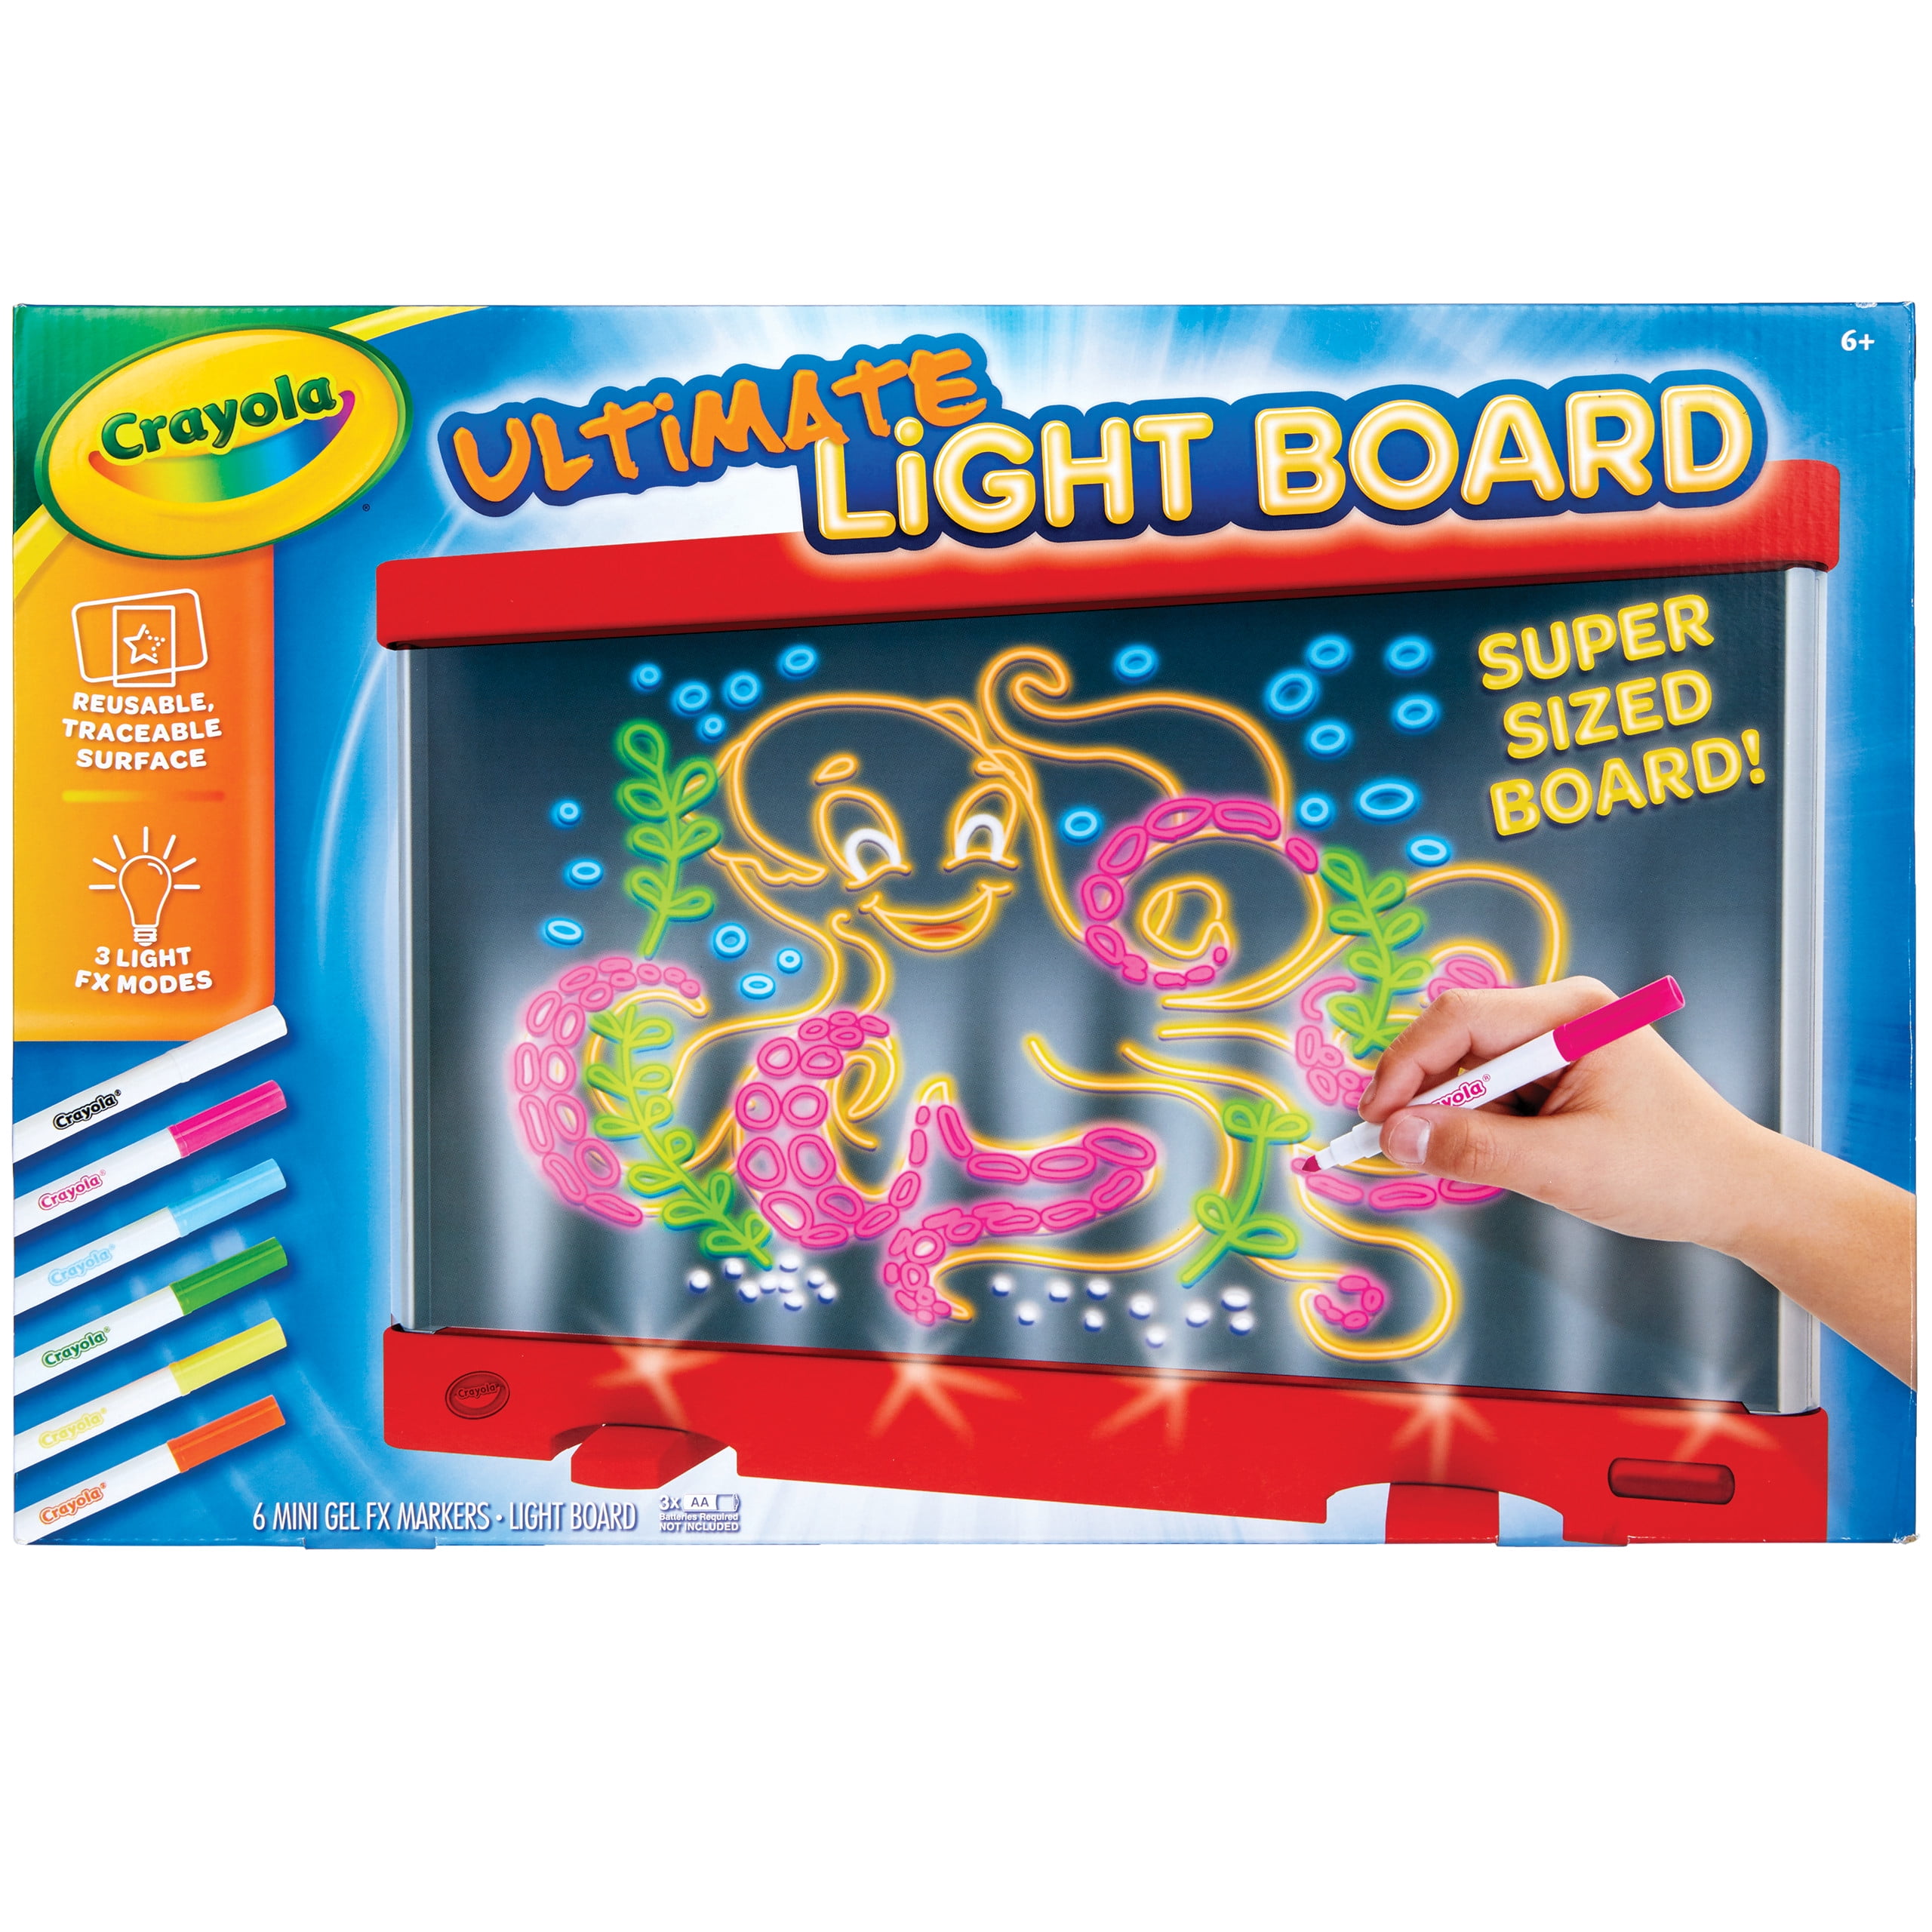 NEW Crayola Ultimate Light Board with 3 light FX Mode Reusable Traceable  Surface